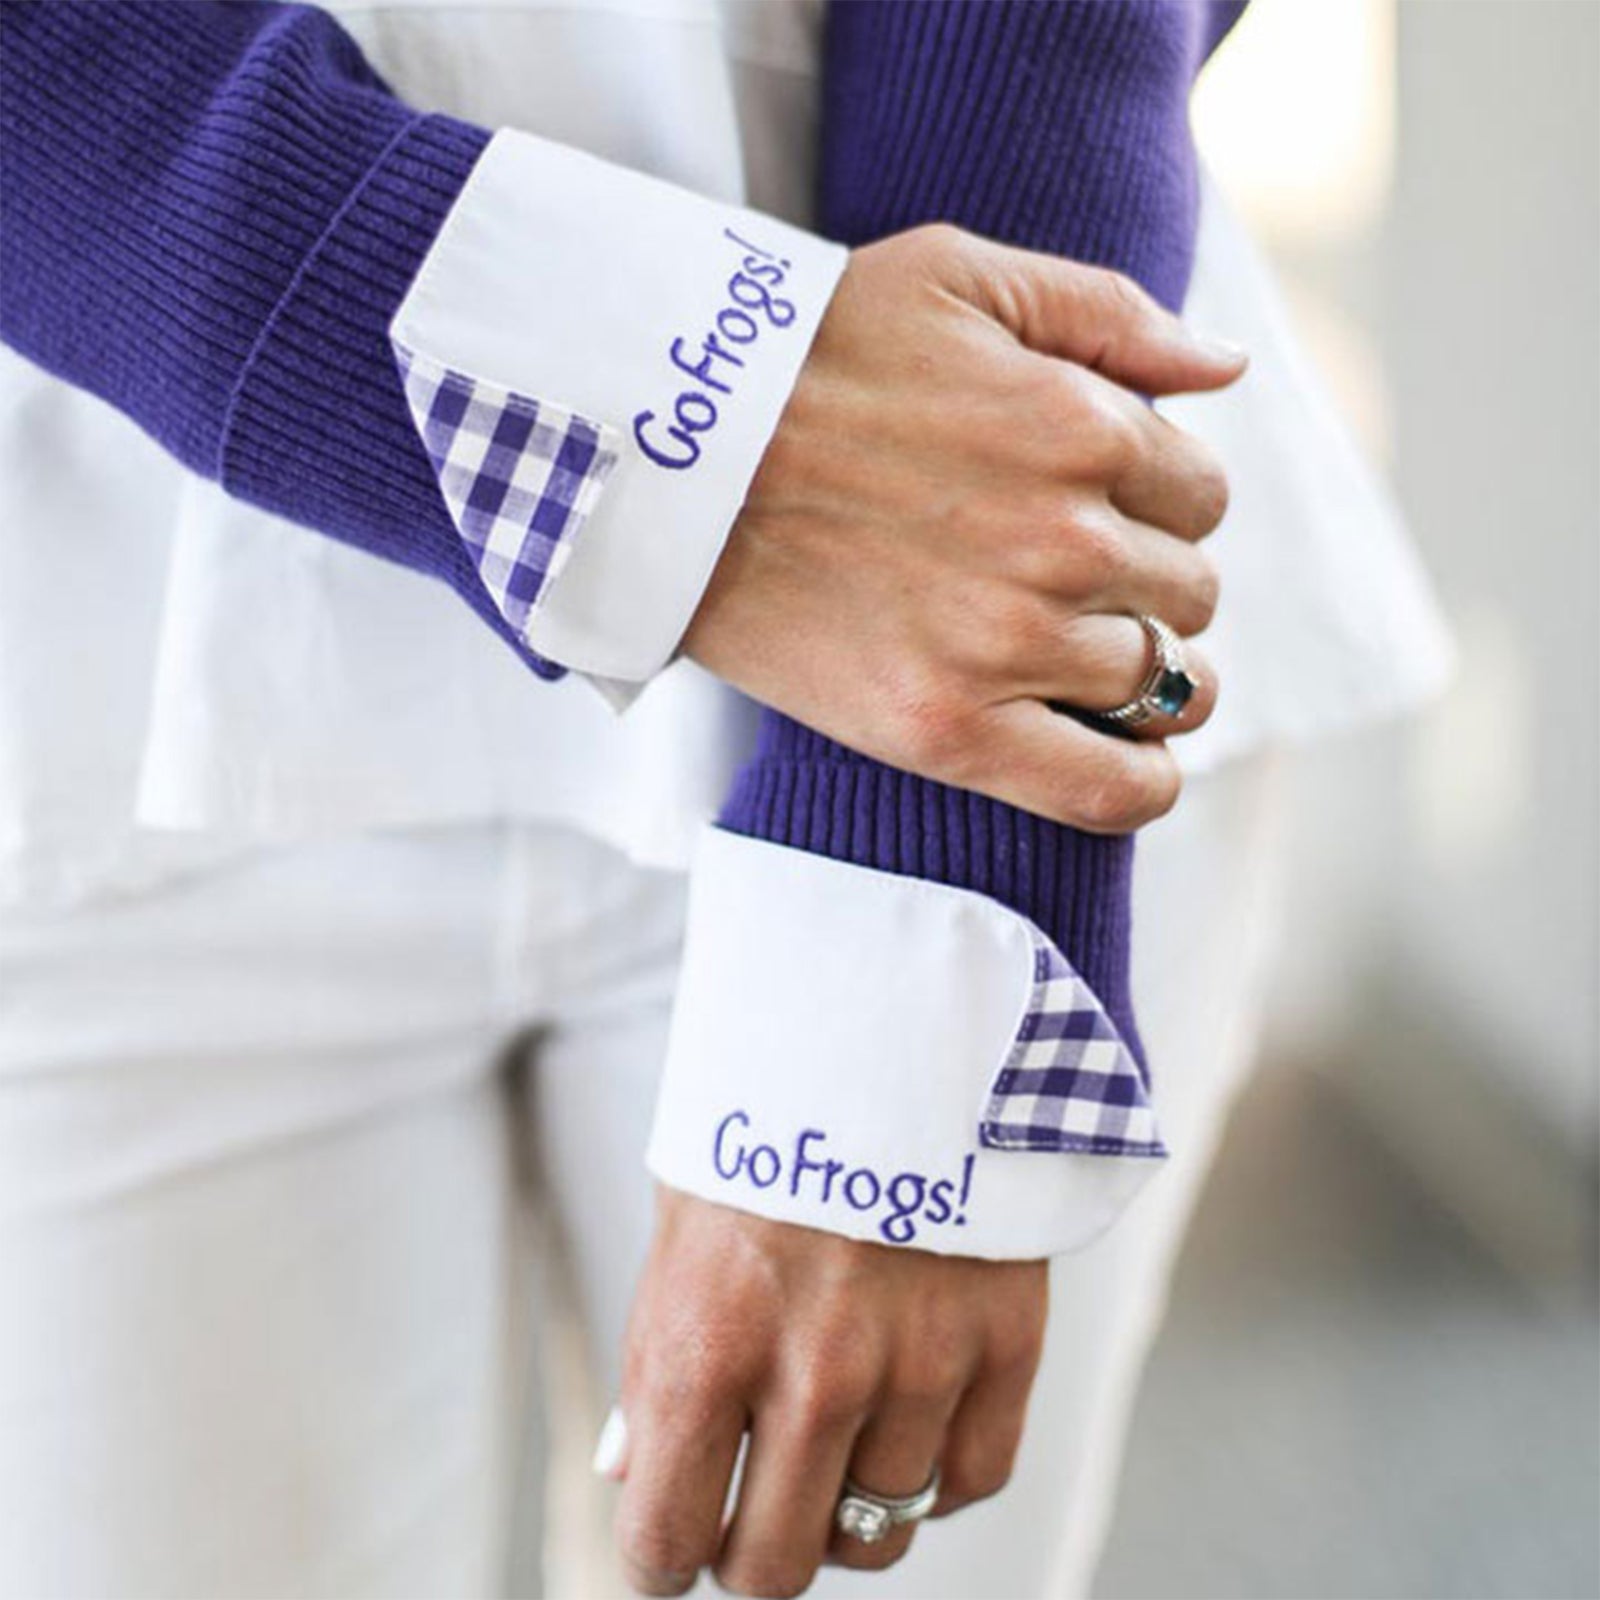 go frogs french cuffs close-up